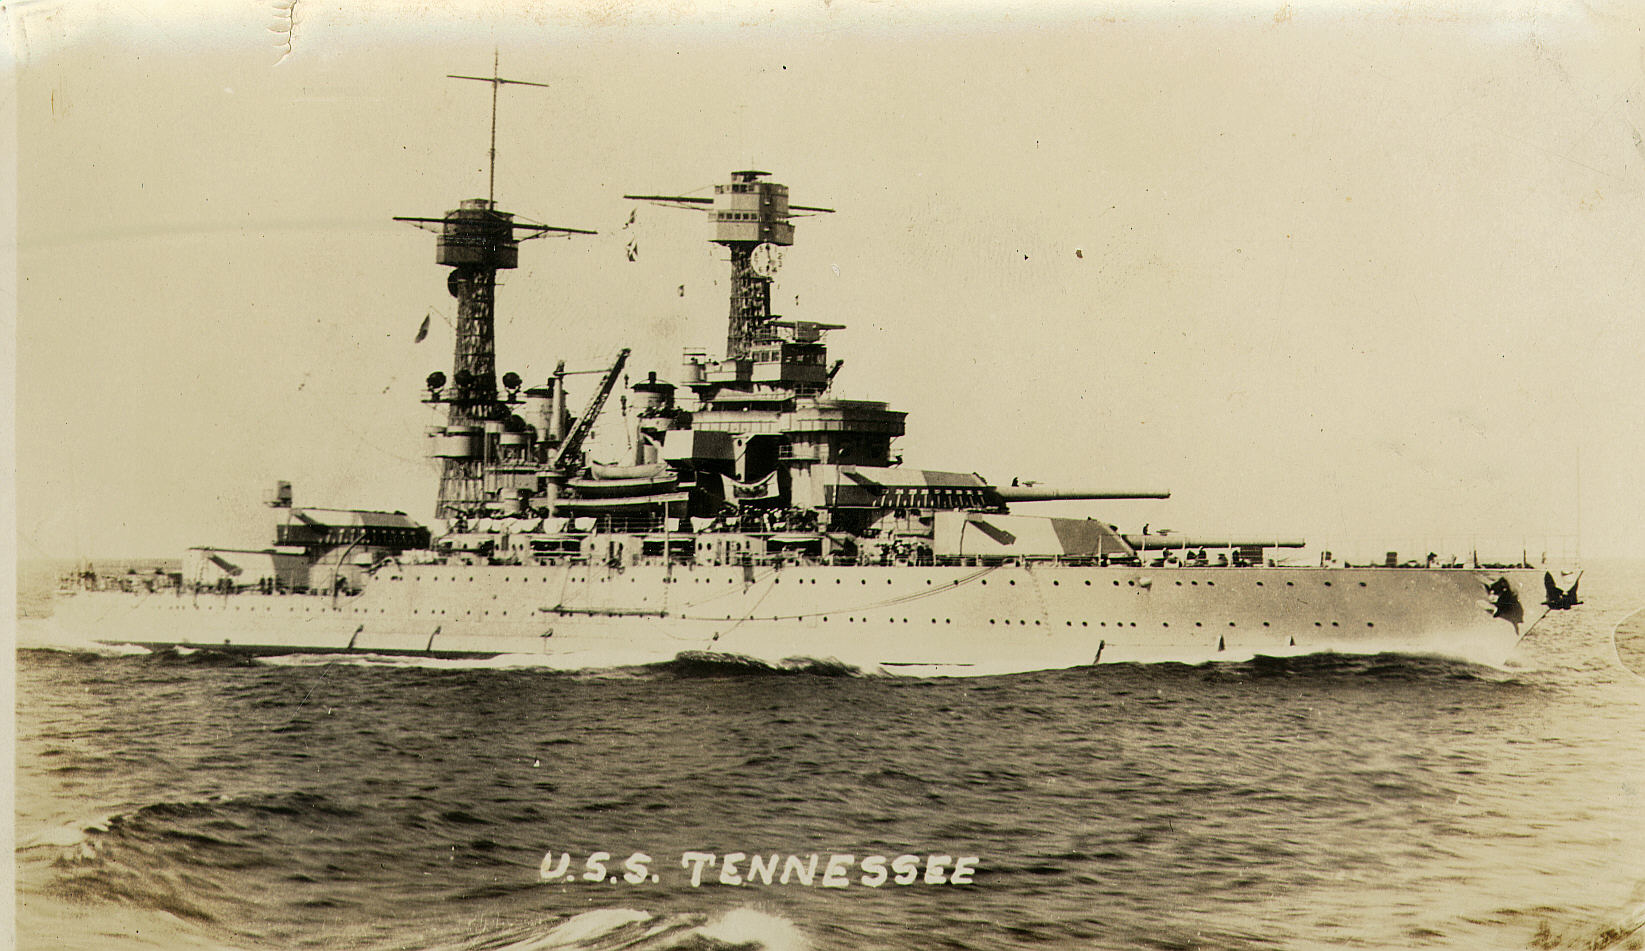 Tennessee (BB-43)